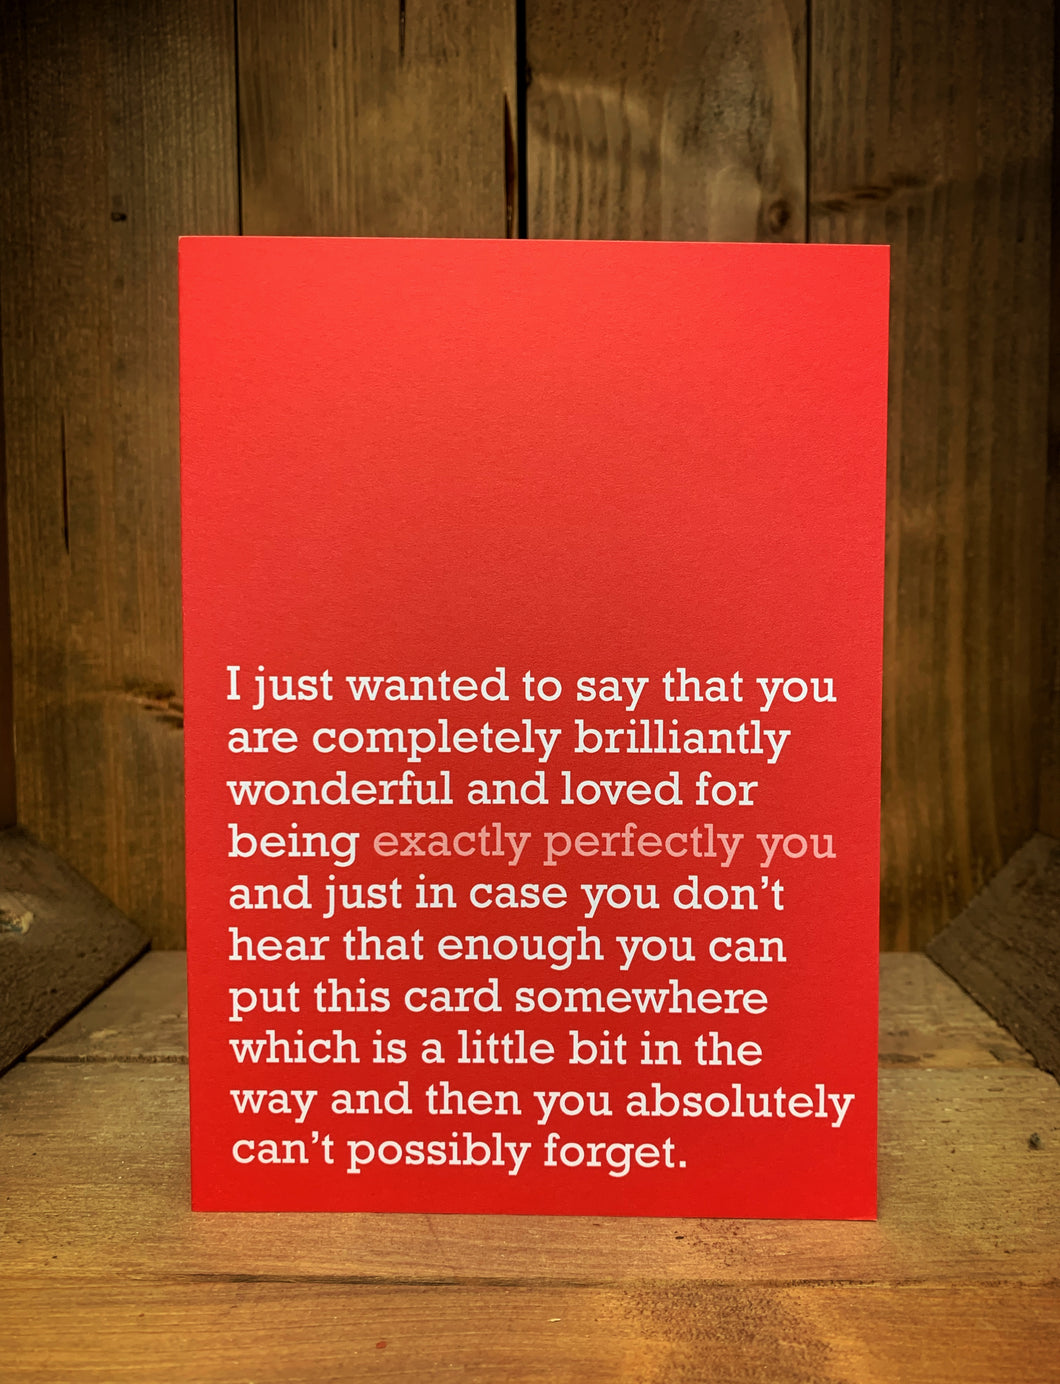 Image of the red coloured greetings card with a typed message on the front in white text saying, 'I just wanted to say that you ae completely brilliantly wonderful and loved for being exactly perfectly you and just in case you don't hear that enough you can put this card somewhere which is a little bit i the way and then you absolutely can't possibly forget.' The word 'exactly perfectly you' are typed in pink and the card is blank inside.